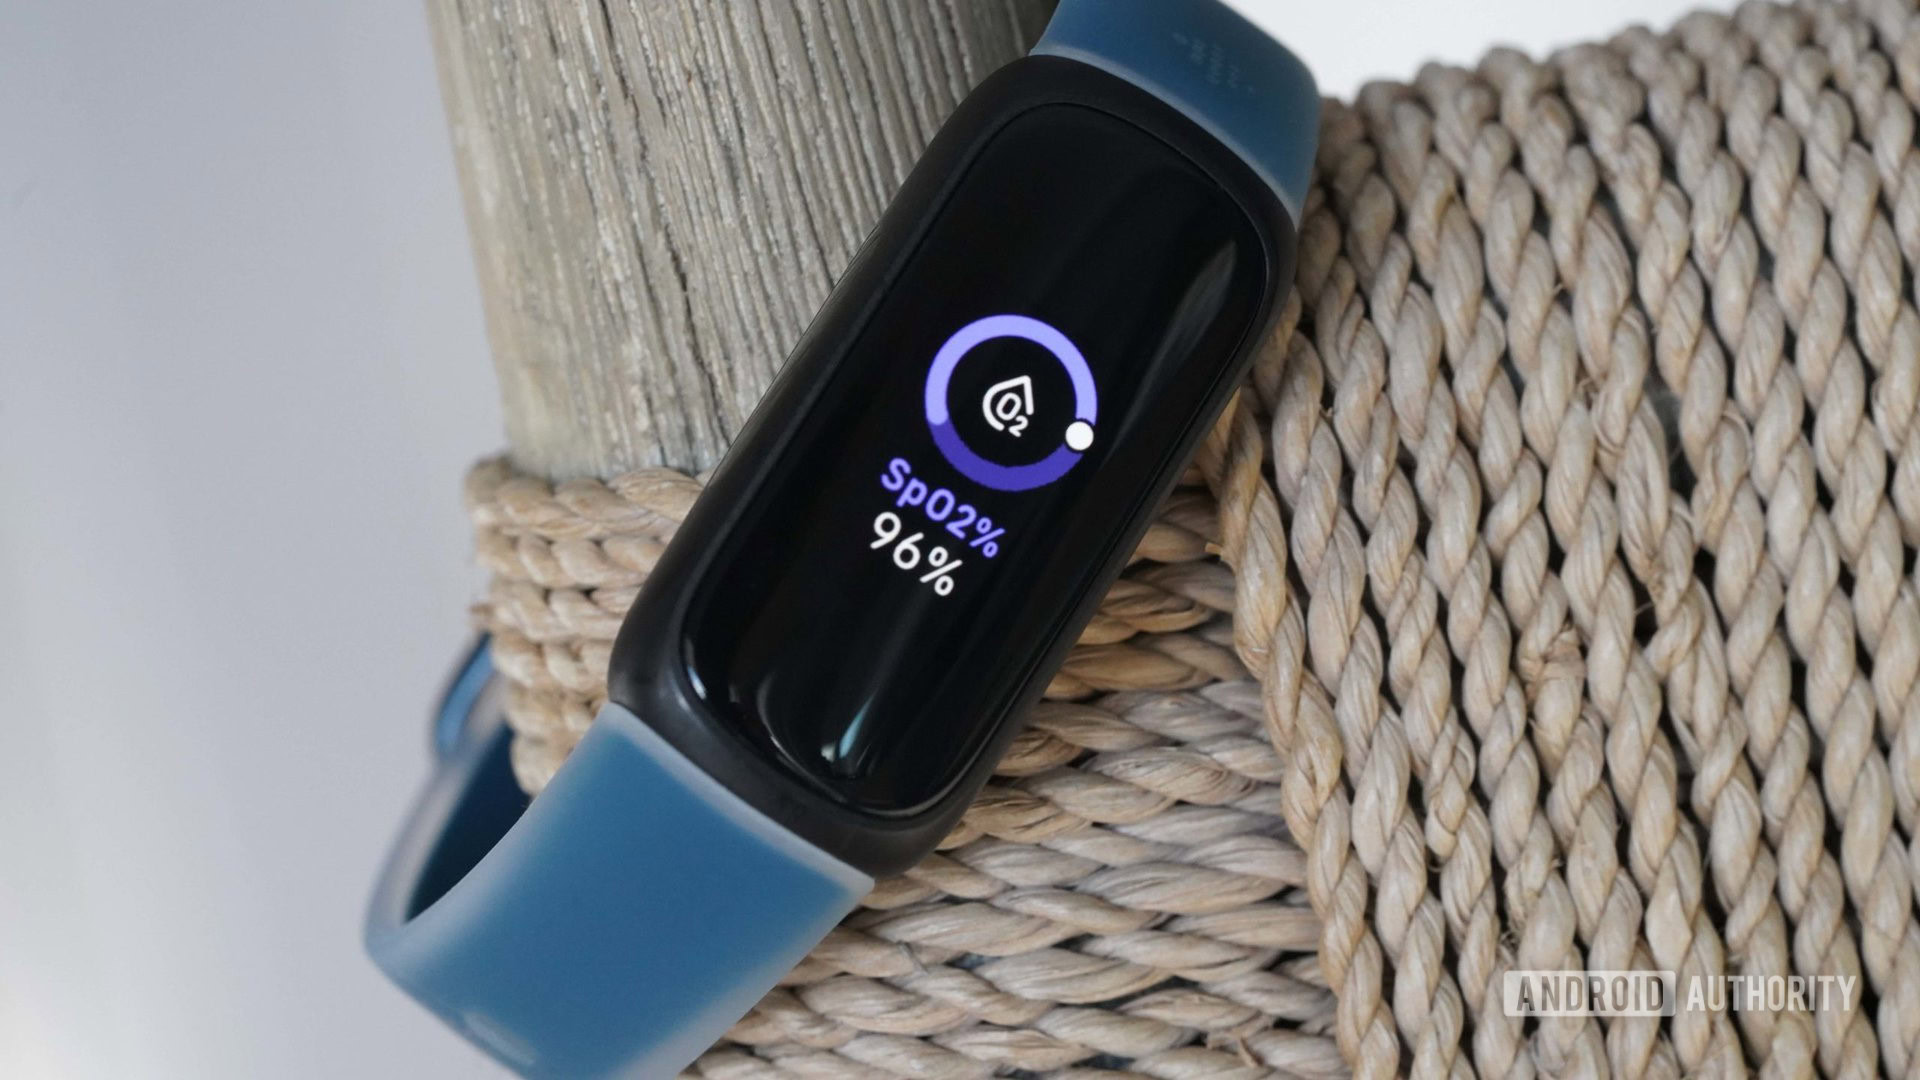 Xiaomi Smart Band 7 Pro headed to Europe as user shares images of an early  global model -  News